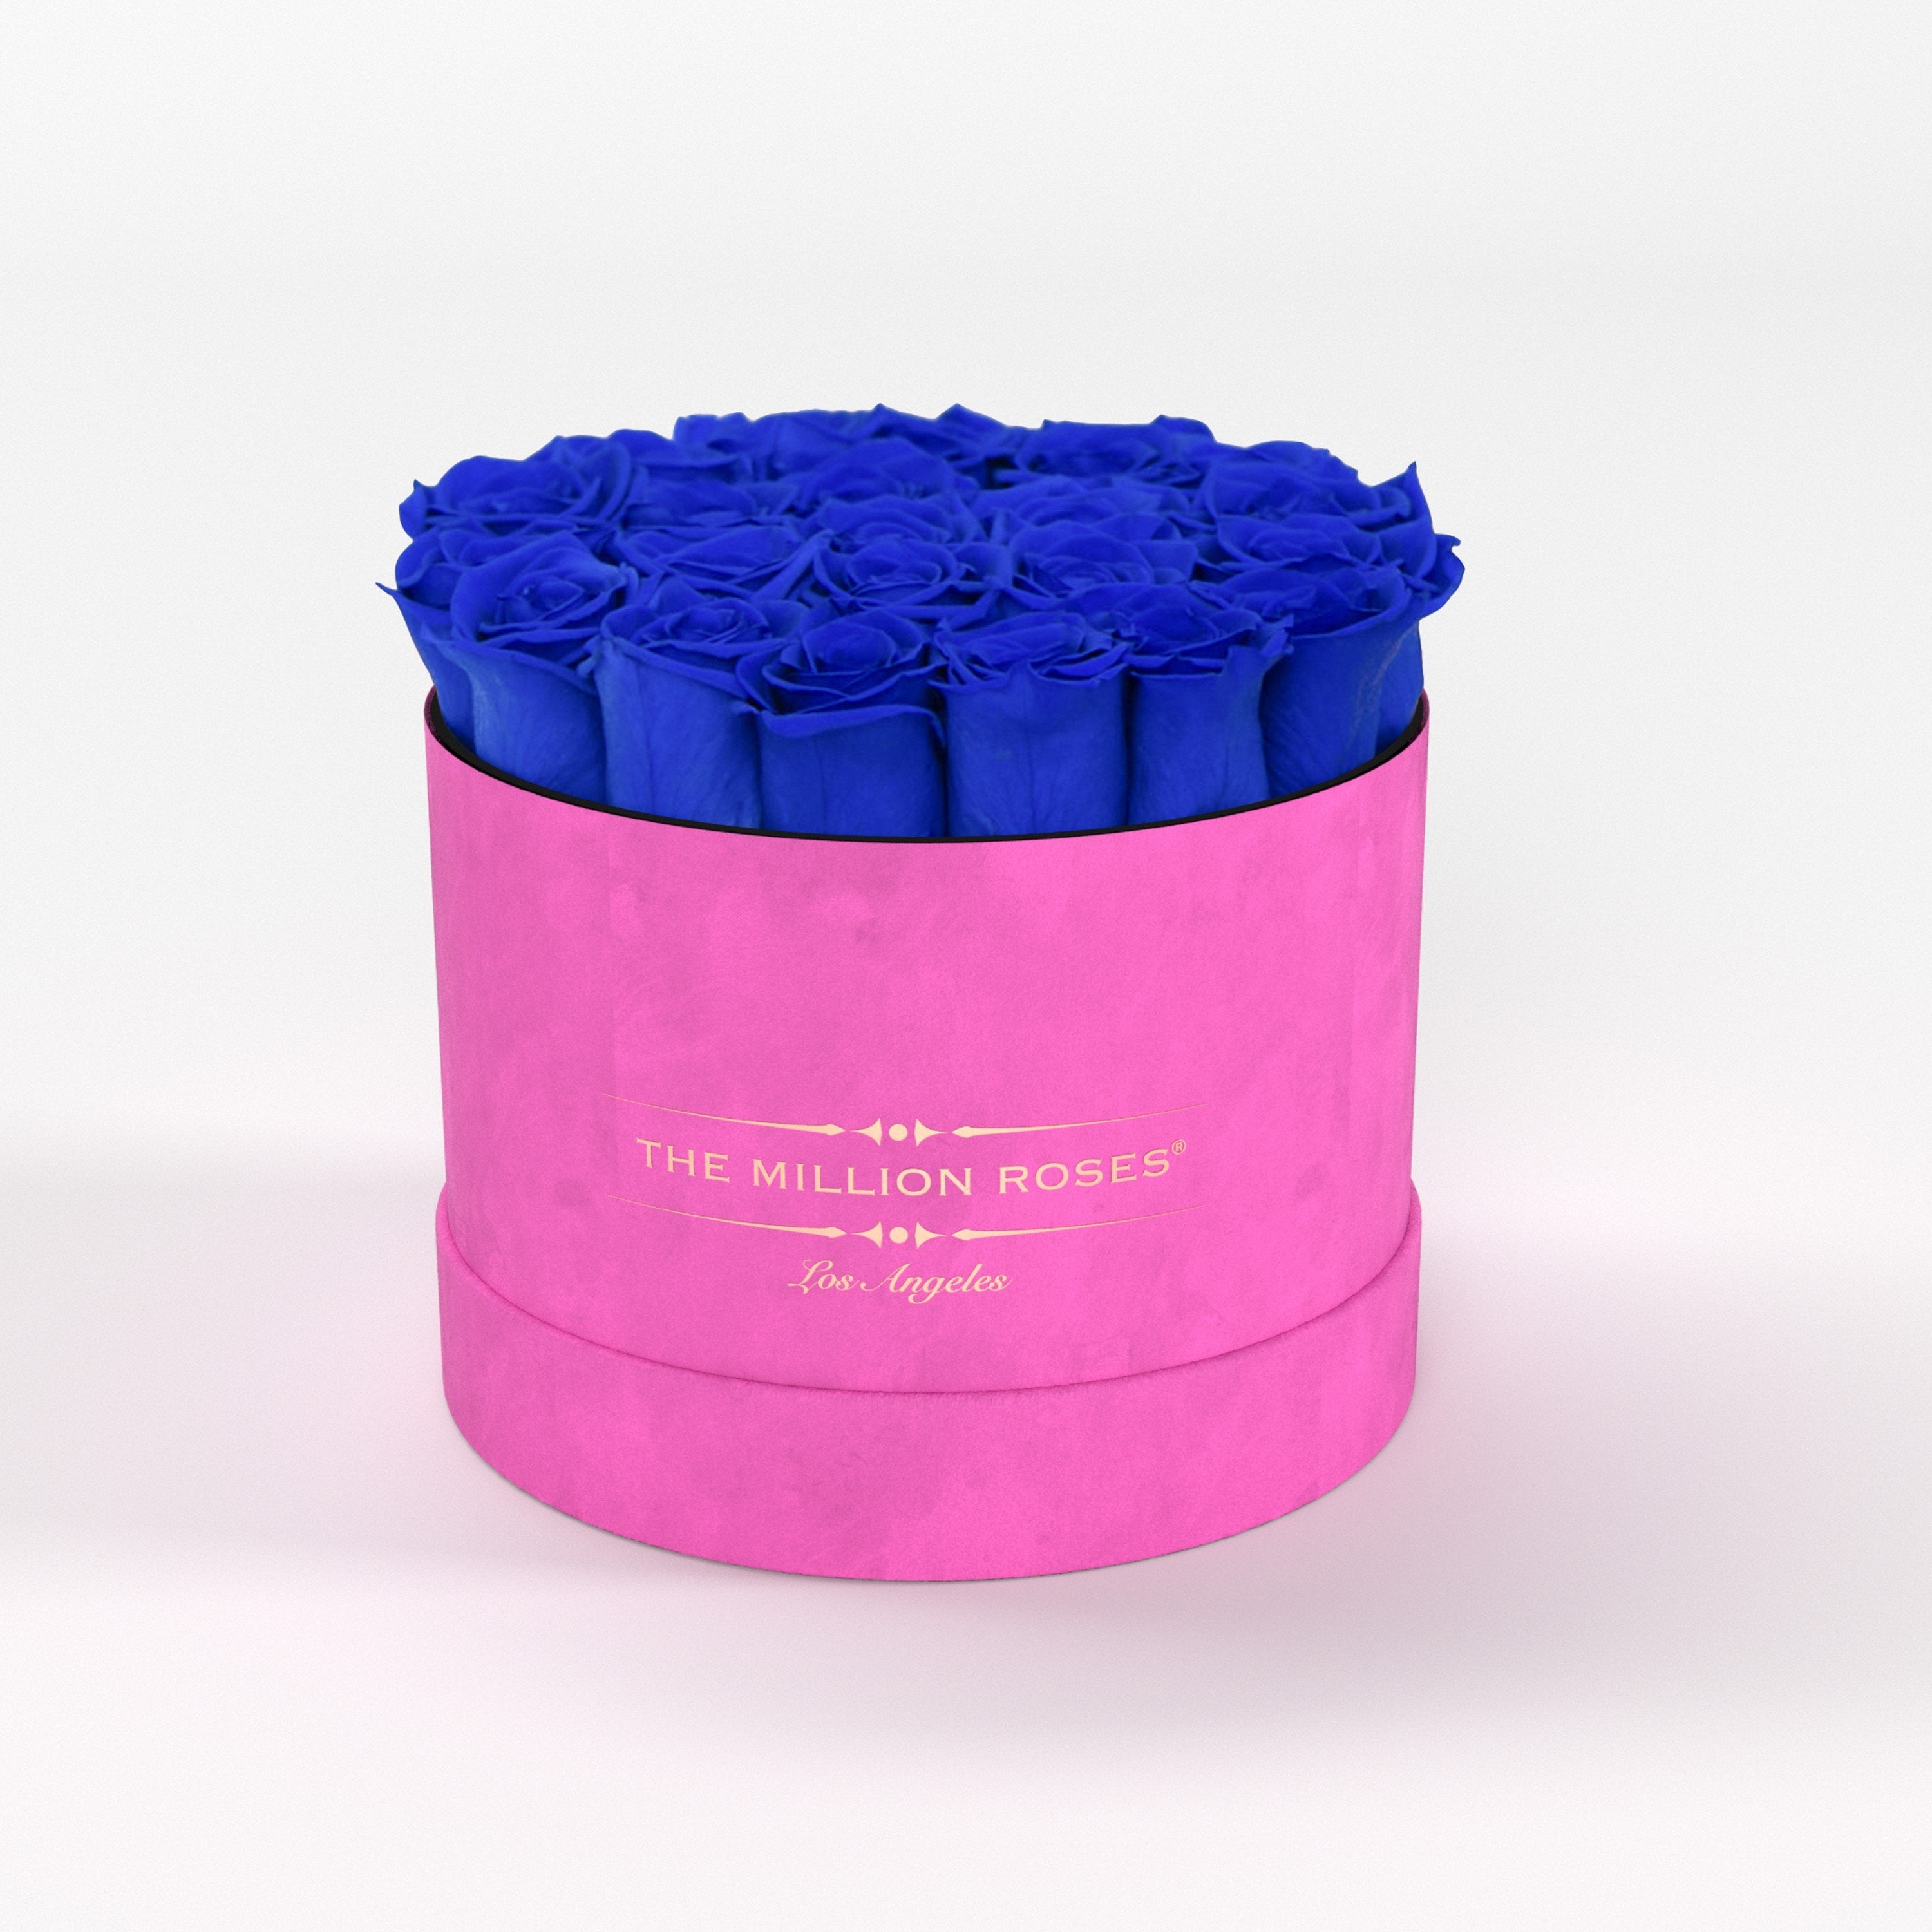 ( LA ) Hot Pink - Suede - Classic Box with Royal Blue Roses Kit - the million roses